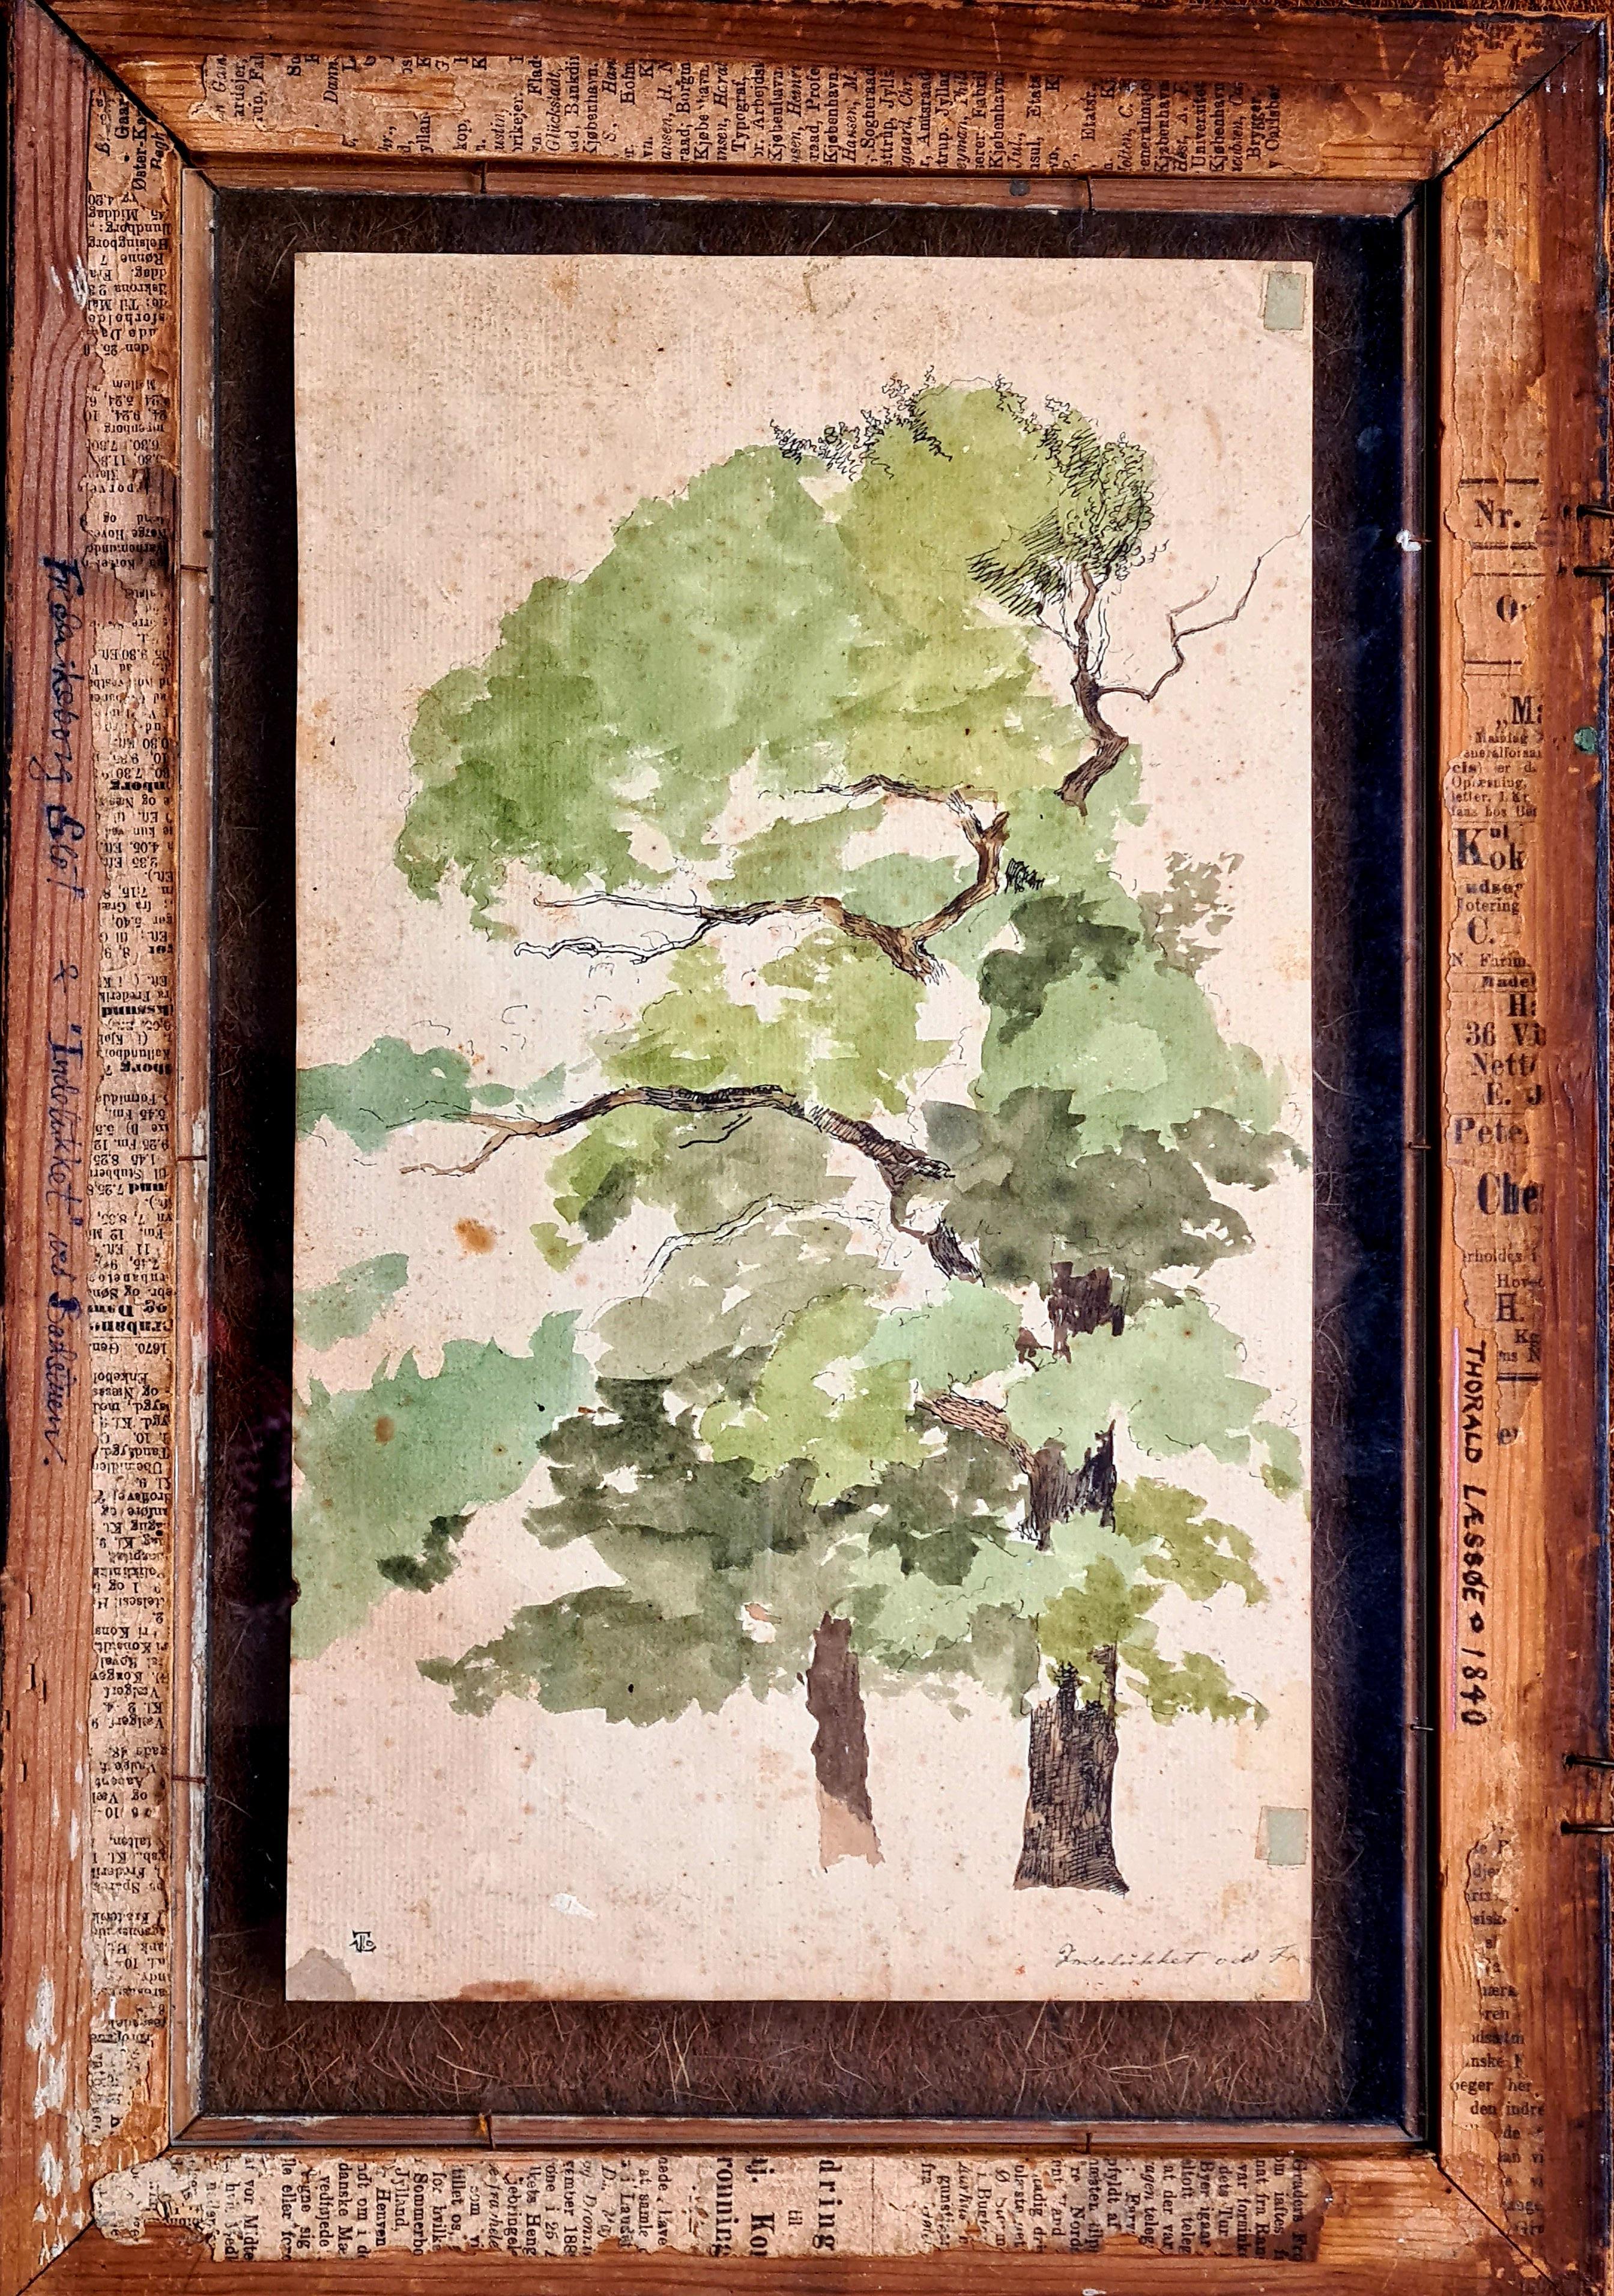 19th Century Danish Drawing and Watercolour Study of a Tree at Indelluket - Art by Thorald Læssøe